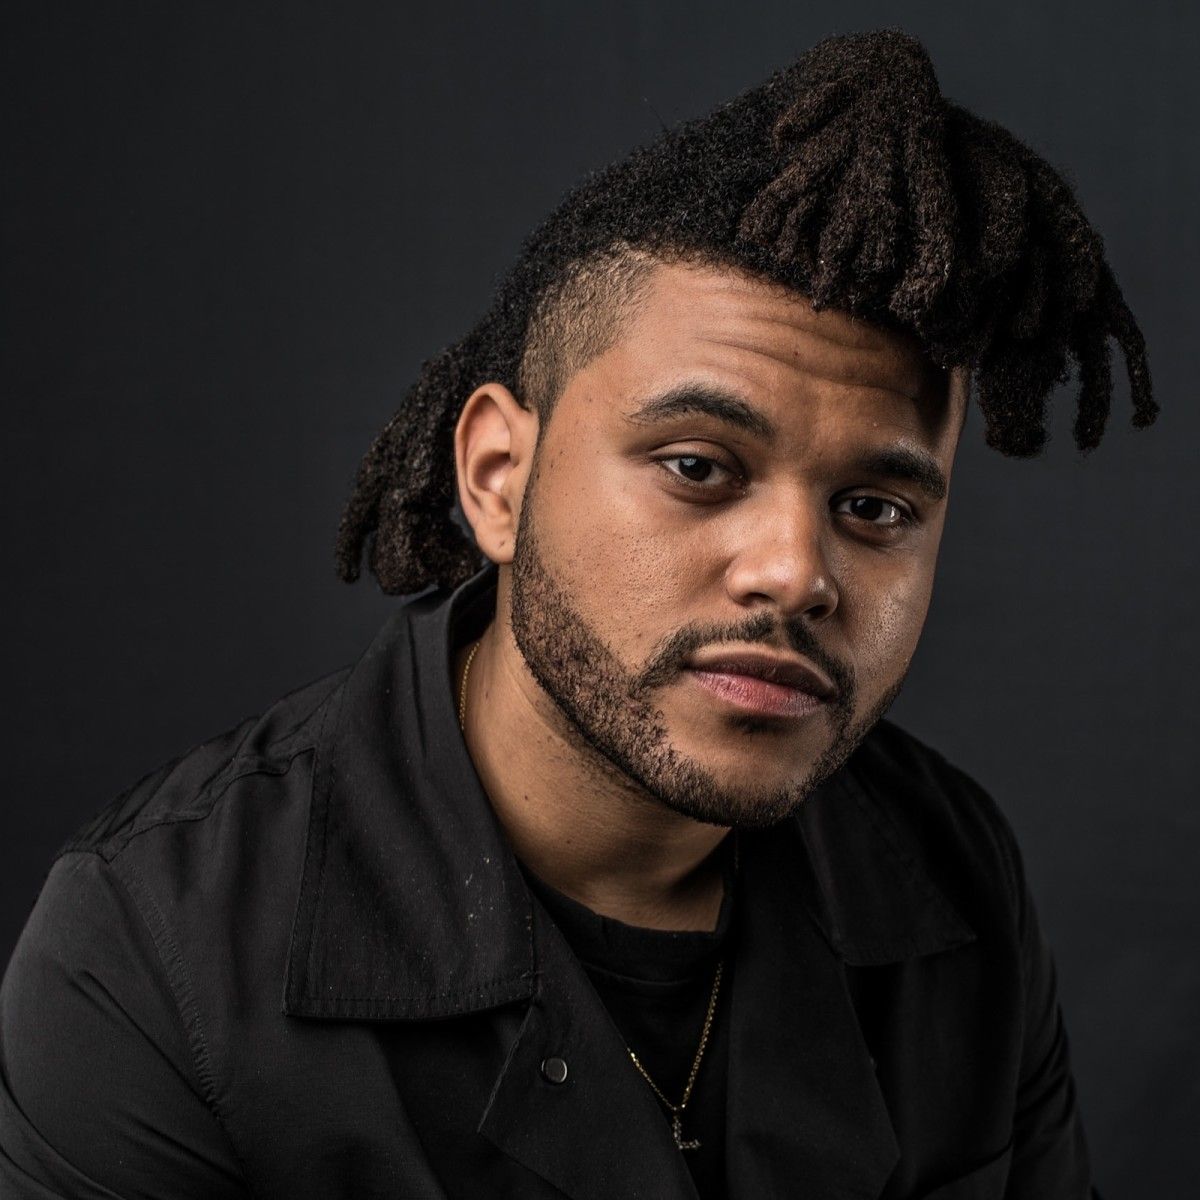 One of the popular celebs who have fake names: The Weeknd